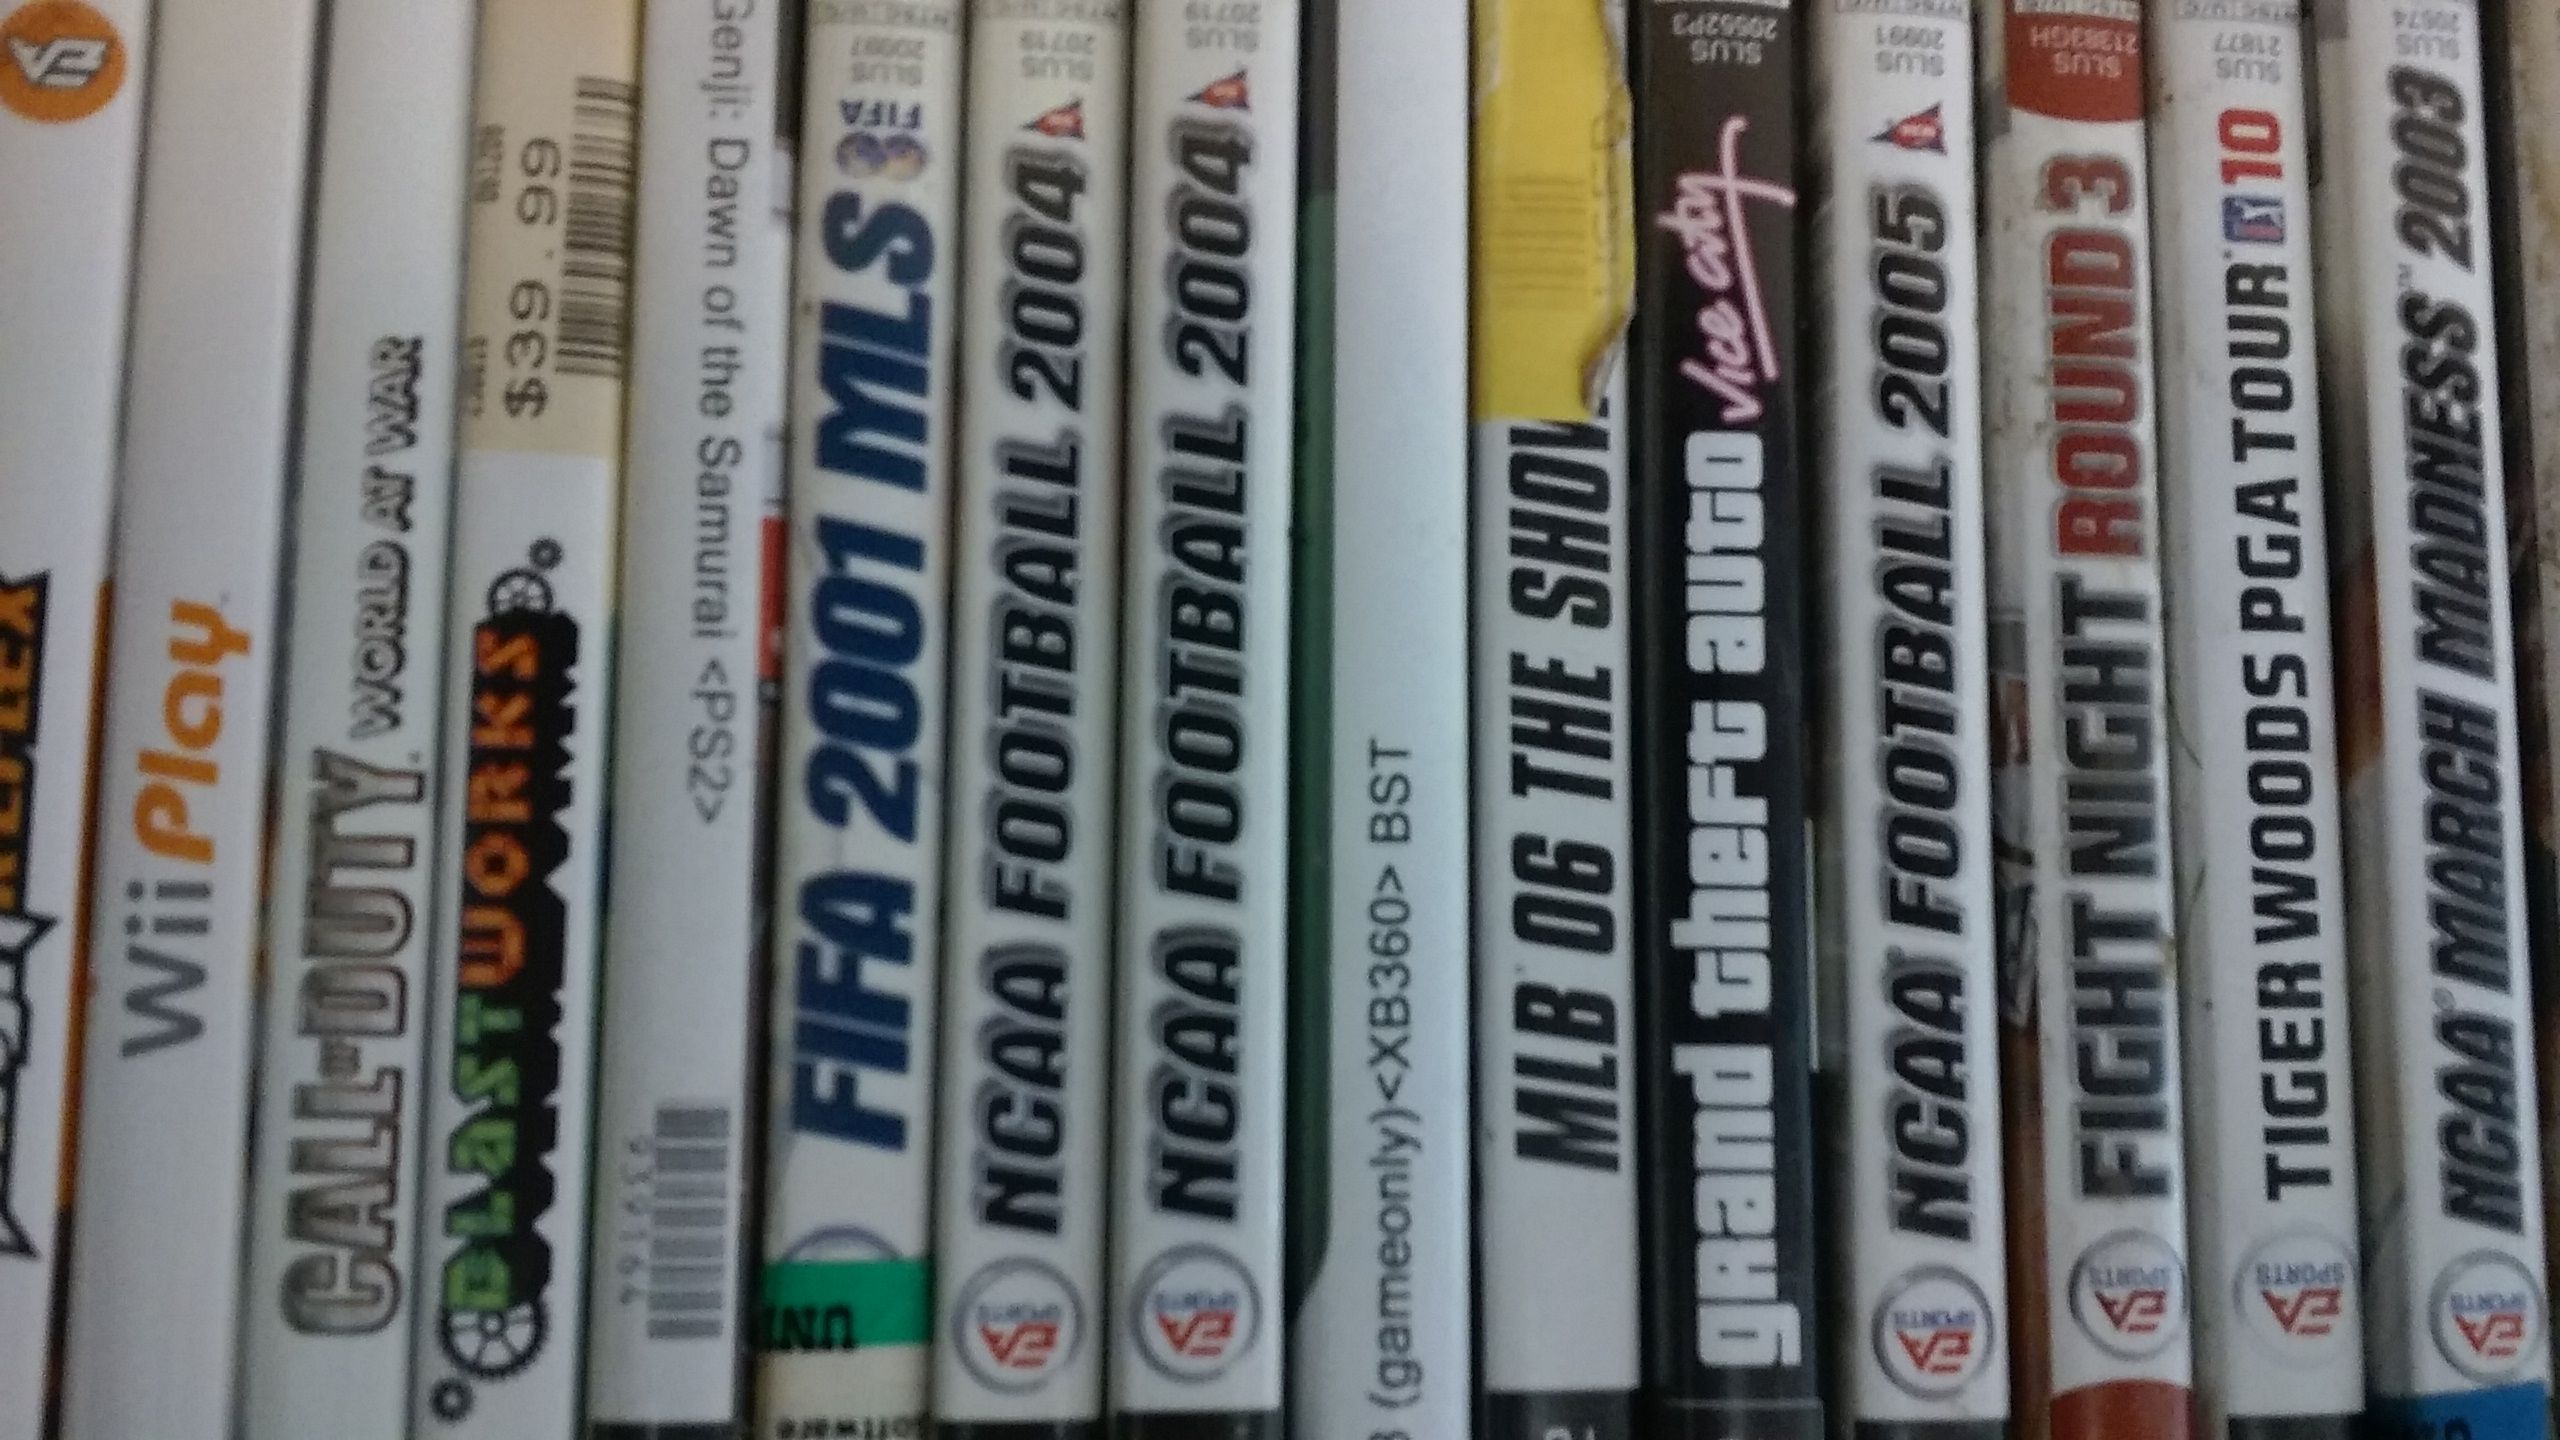 rare video games for sale